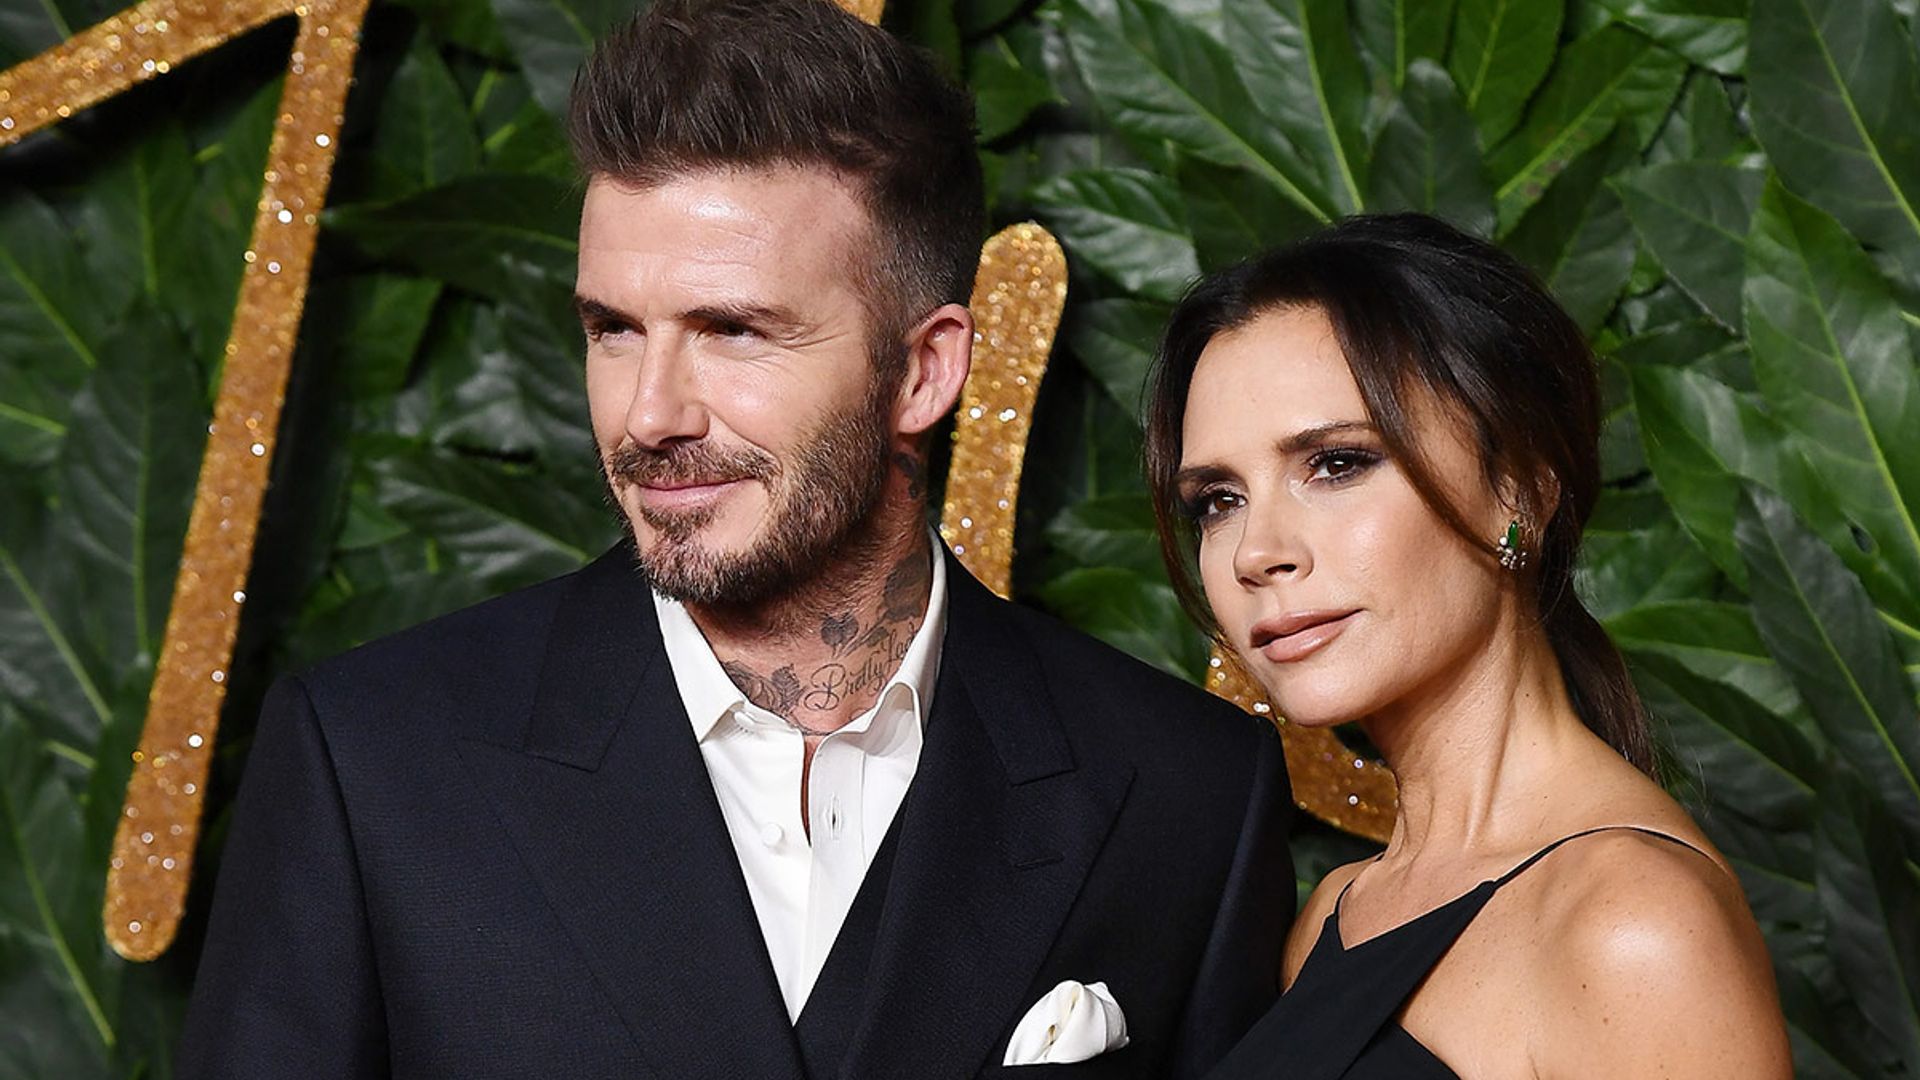 Victoria Beckham shares unseen glimpse into her bedroom with David Beckham at £6m Cotswolds home